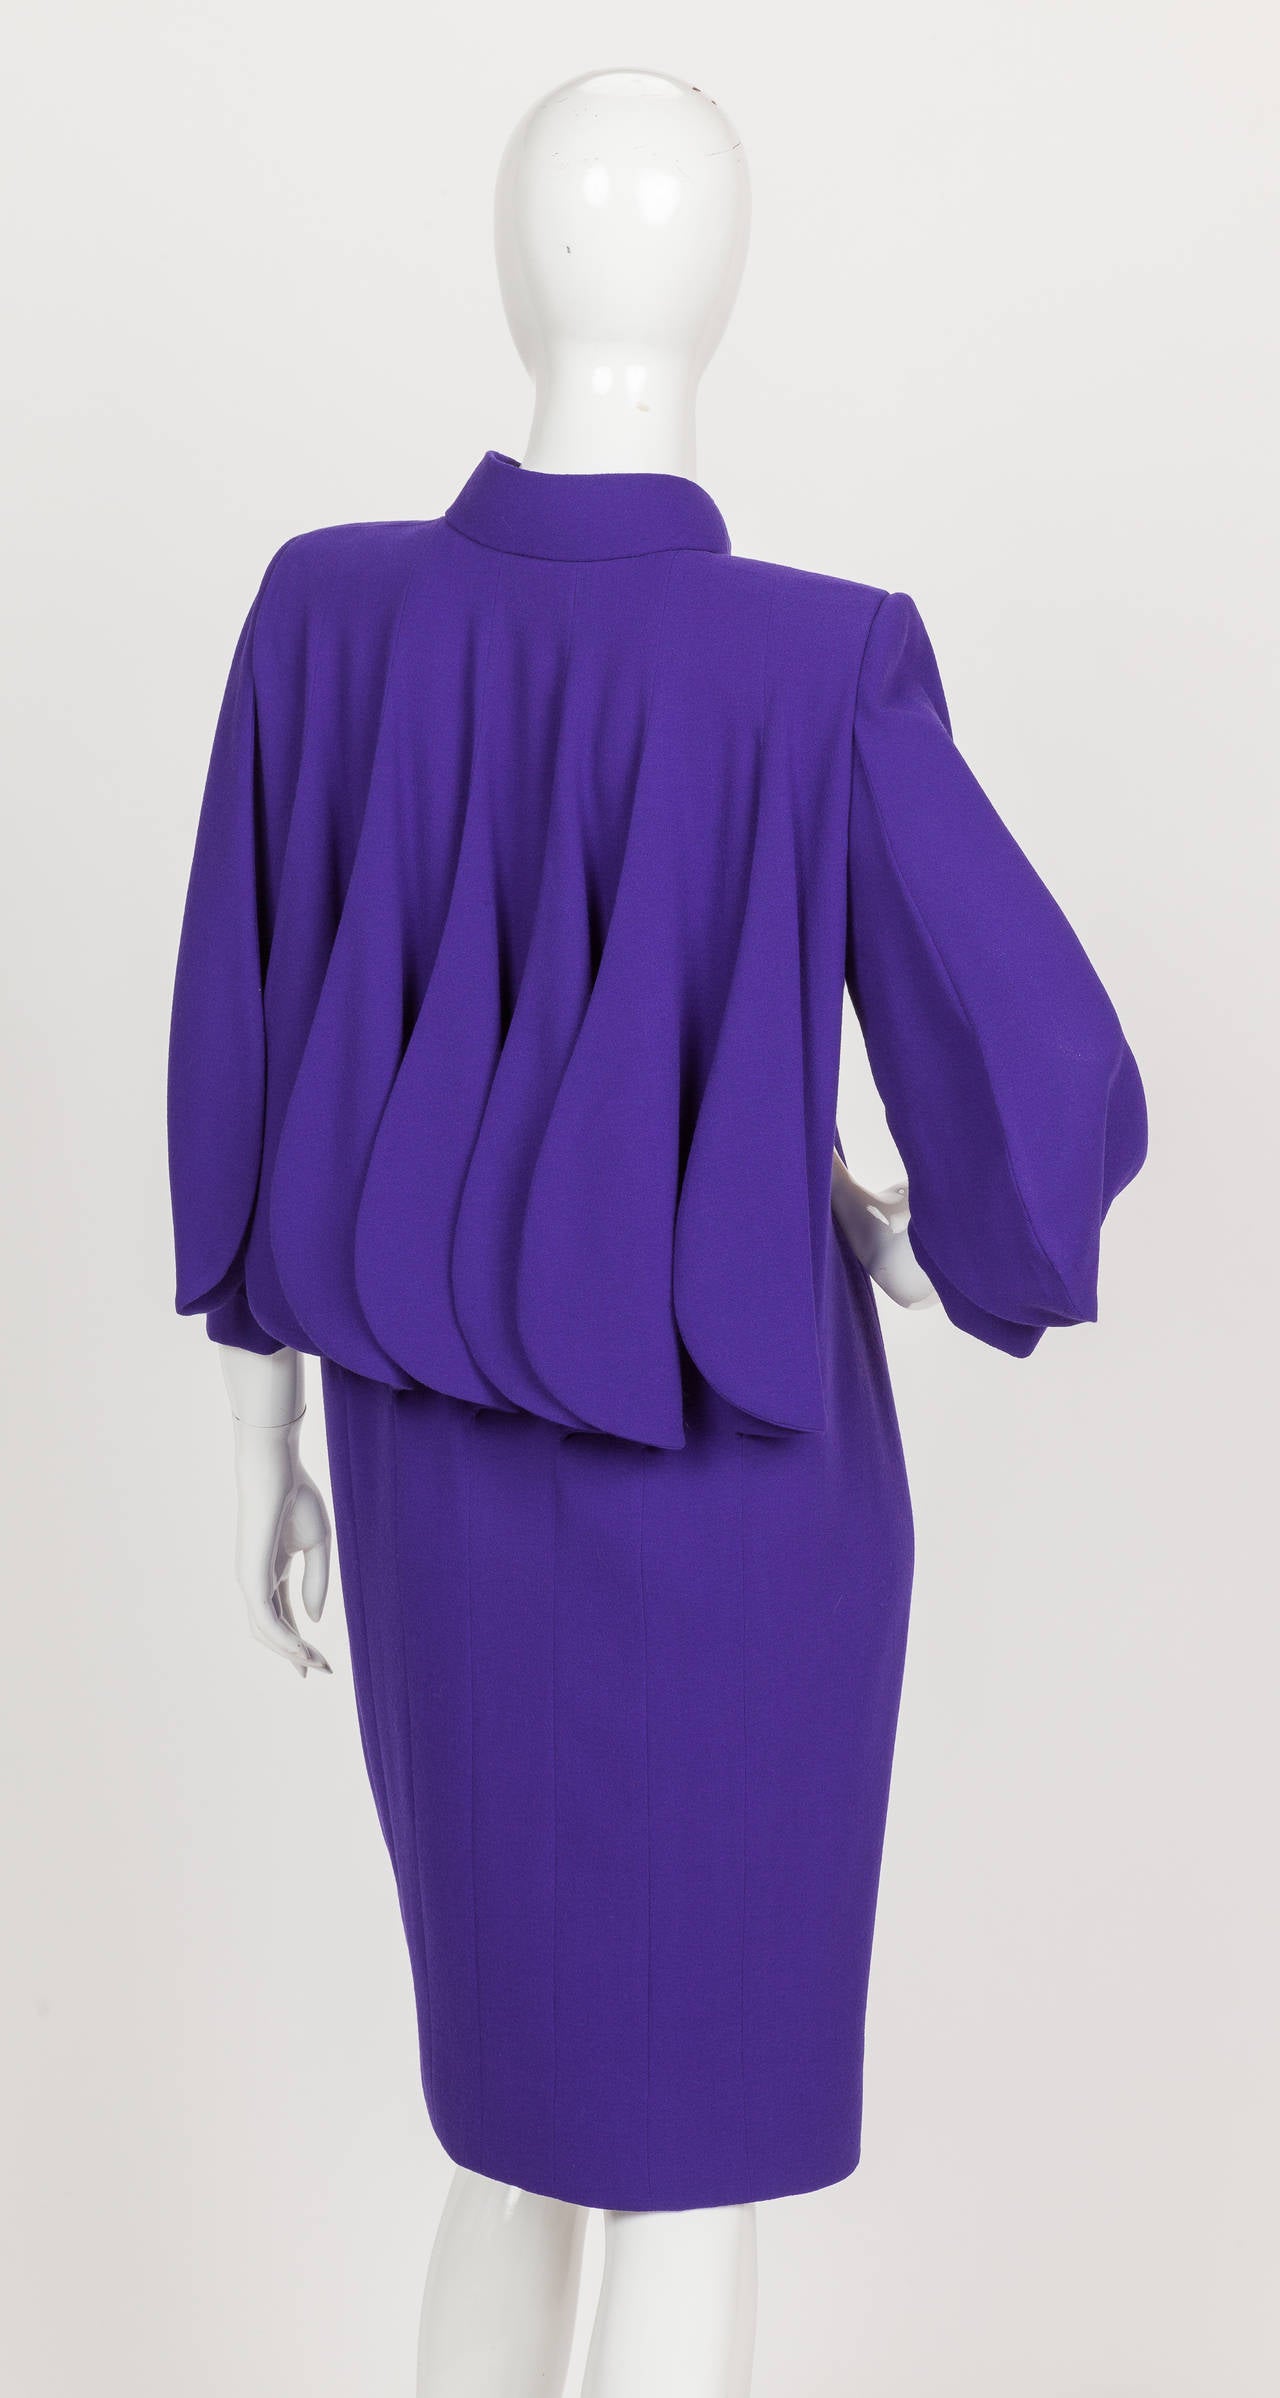 A circa 1992 Pierre Cardin haute couture  purple wool crepe cocktail dress with 3/4 sleeves that features a signature Cardin design motif - 